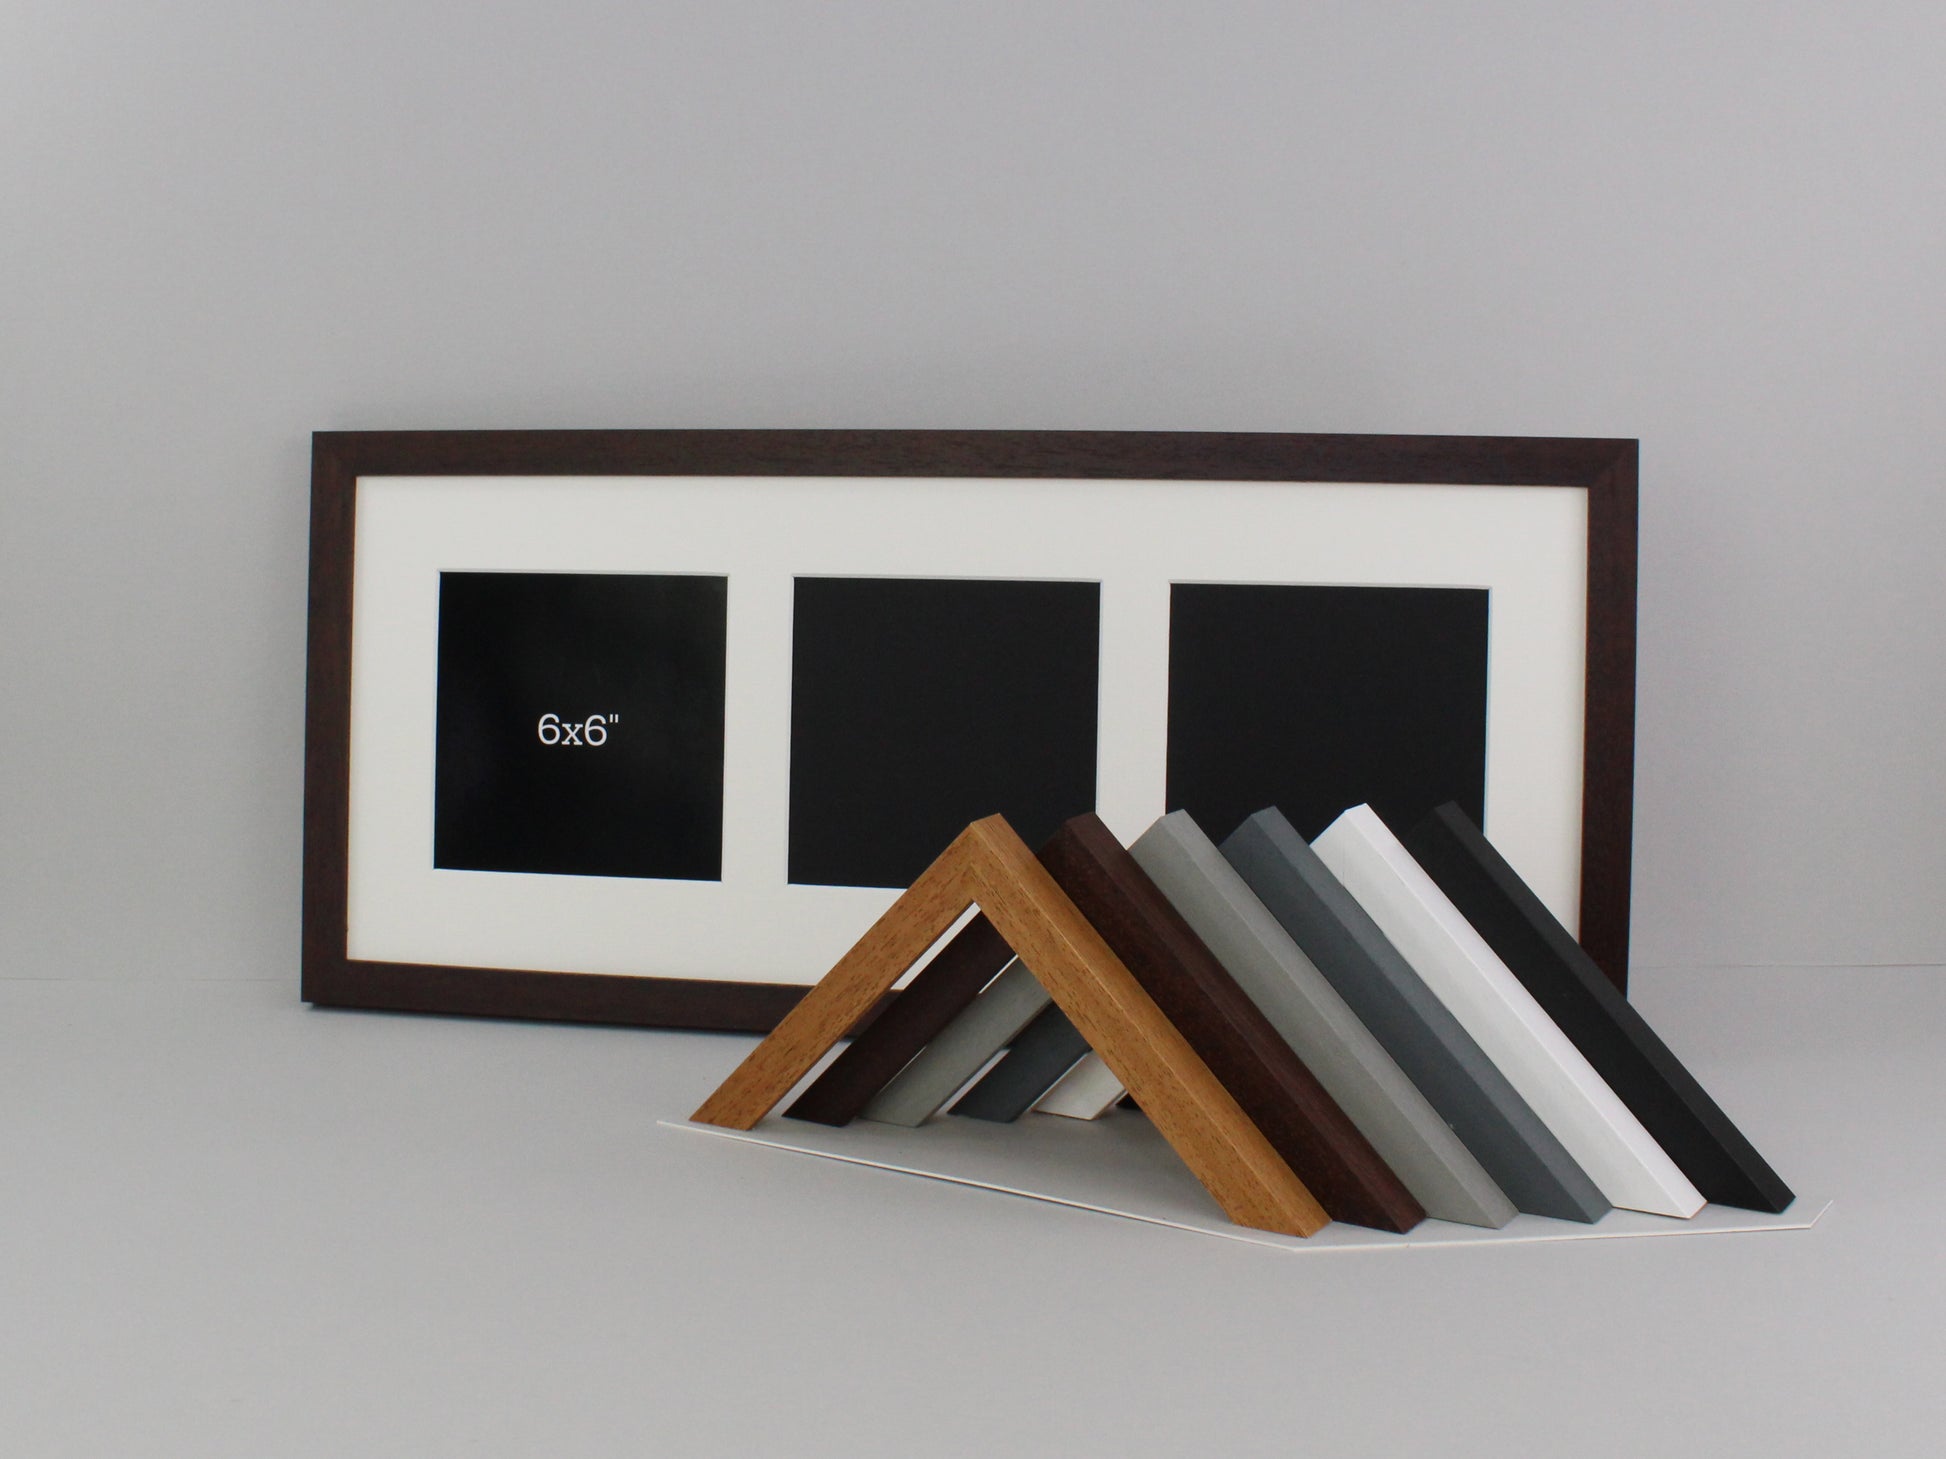 Multi Aperture Photo Frame. Holds Six 6x4 Sized Images. 20x70cm. Portrait  or Landscape. Handmade by Arthome. 